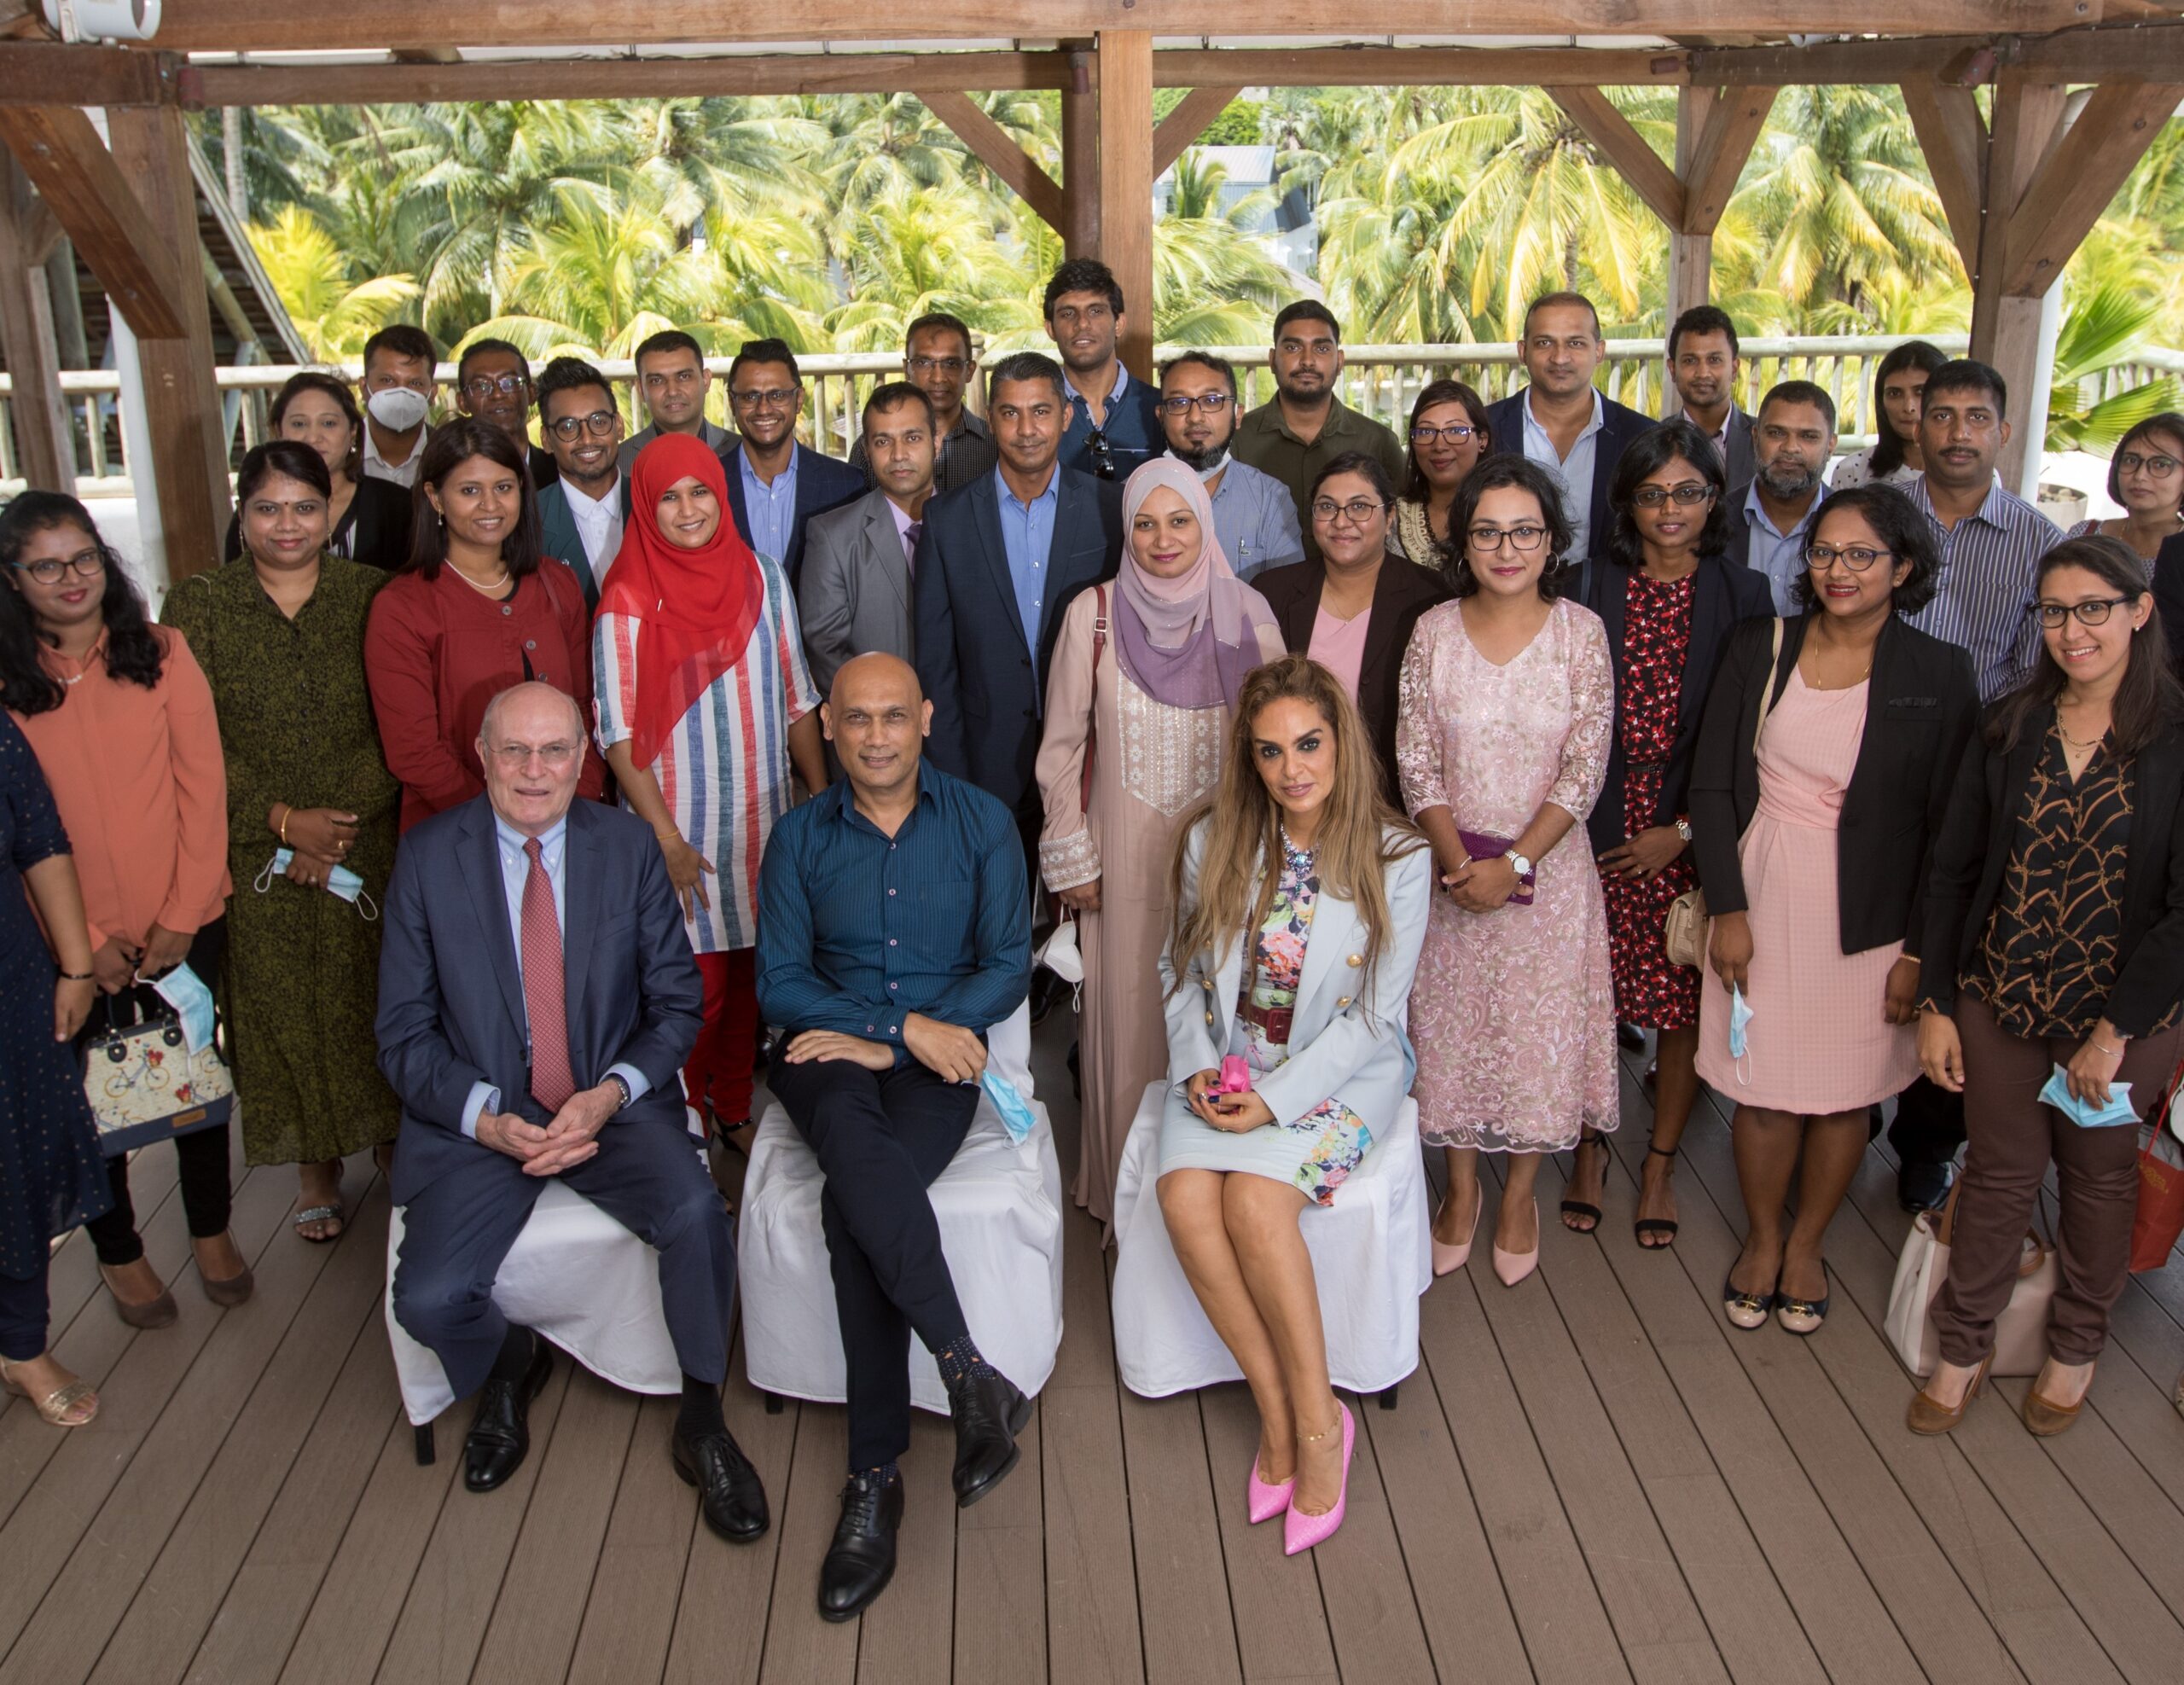 Merck Foundation offers Scholarships to Doctors from 50 Countries in 36 Specialties to Transform Patient Care in Africa and Beyond